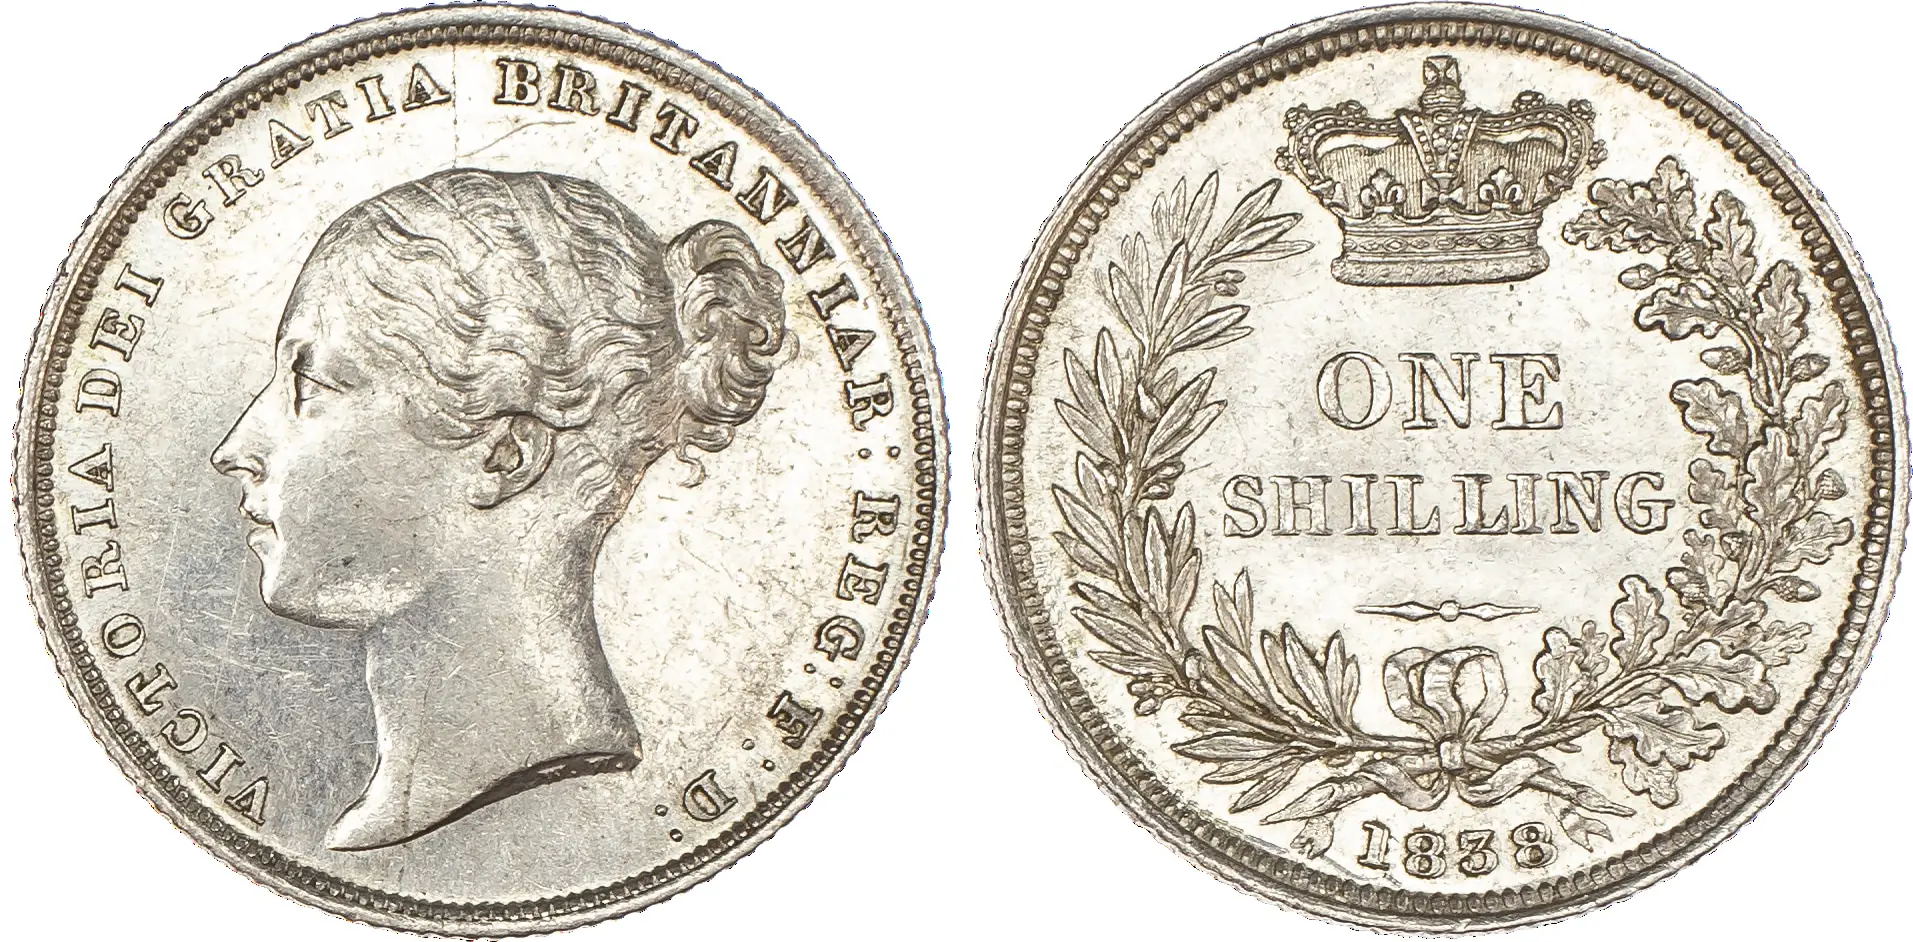 Queen Victoria one Shilling 1838